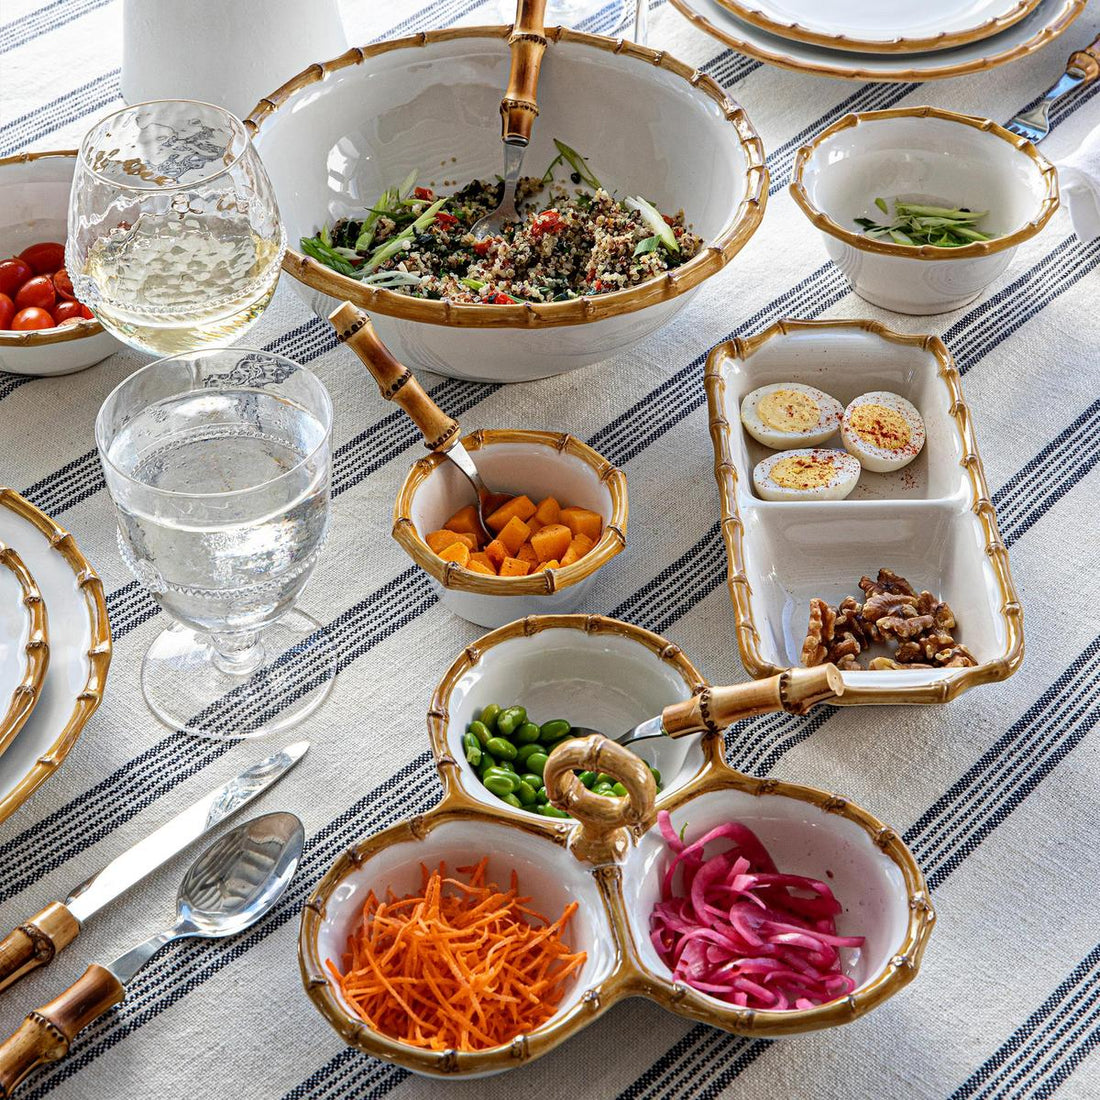 Elegant table setting featuring a variety of salads and appetizers with gold-trimmed, hand-painted Juliska ceramic dinnerware and glassware, along with Juliska Classic Natural Bamboo Serving Pieces.